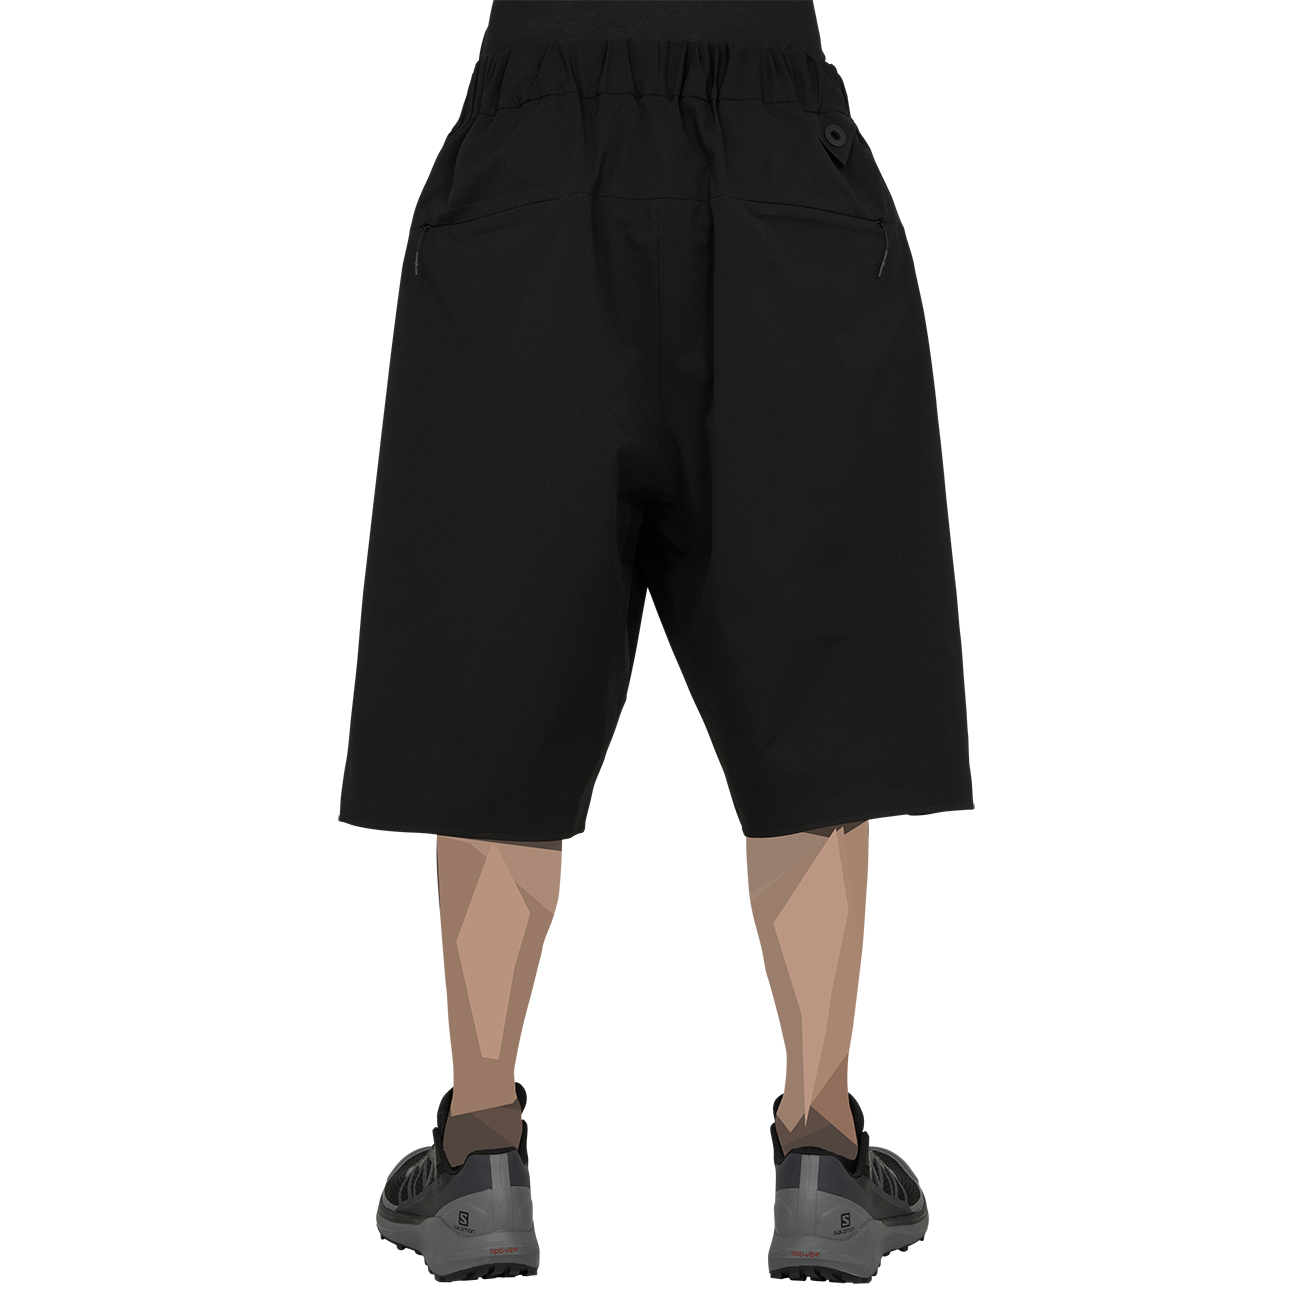 WHITE MOUNTAINEERING BLK (ホワイトマウンテニアリング ビーエルケー) - 22AW STRETCHED SARROUEL SHORTS BLACKの詳細画像4